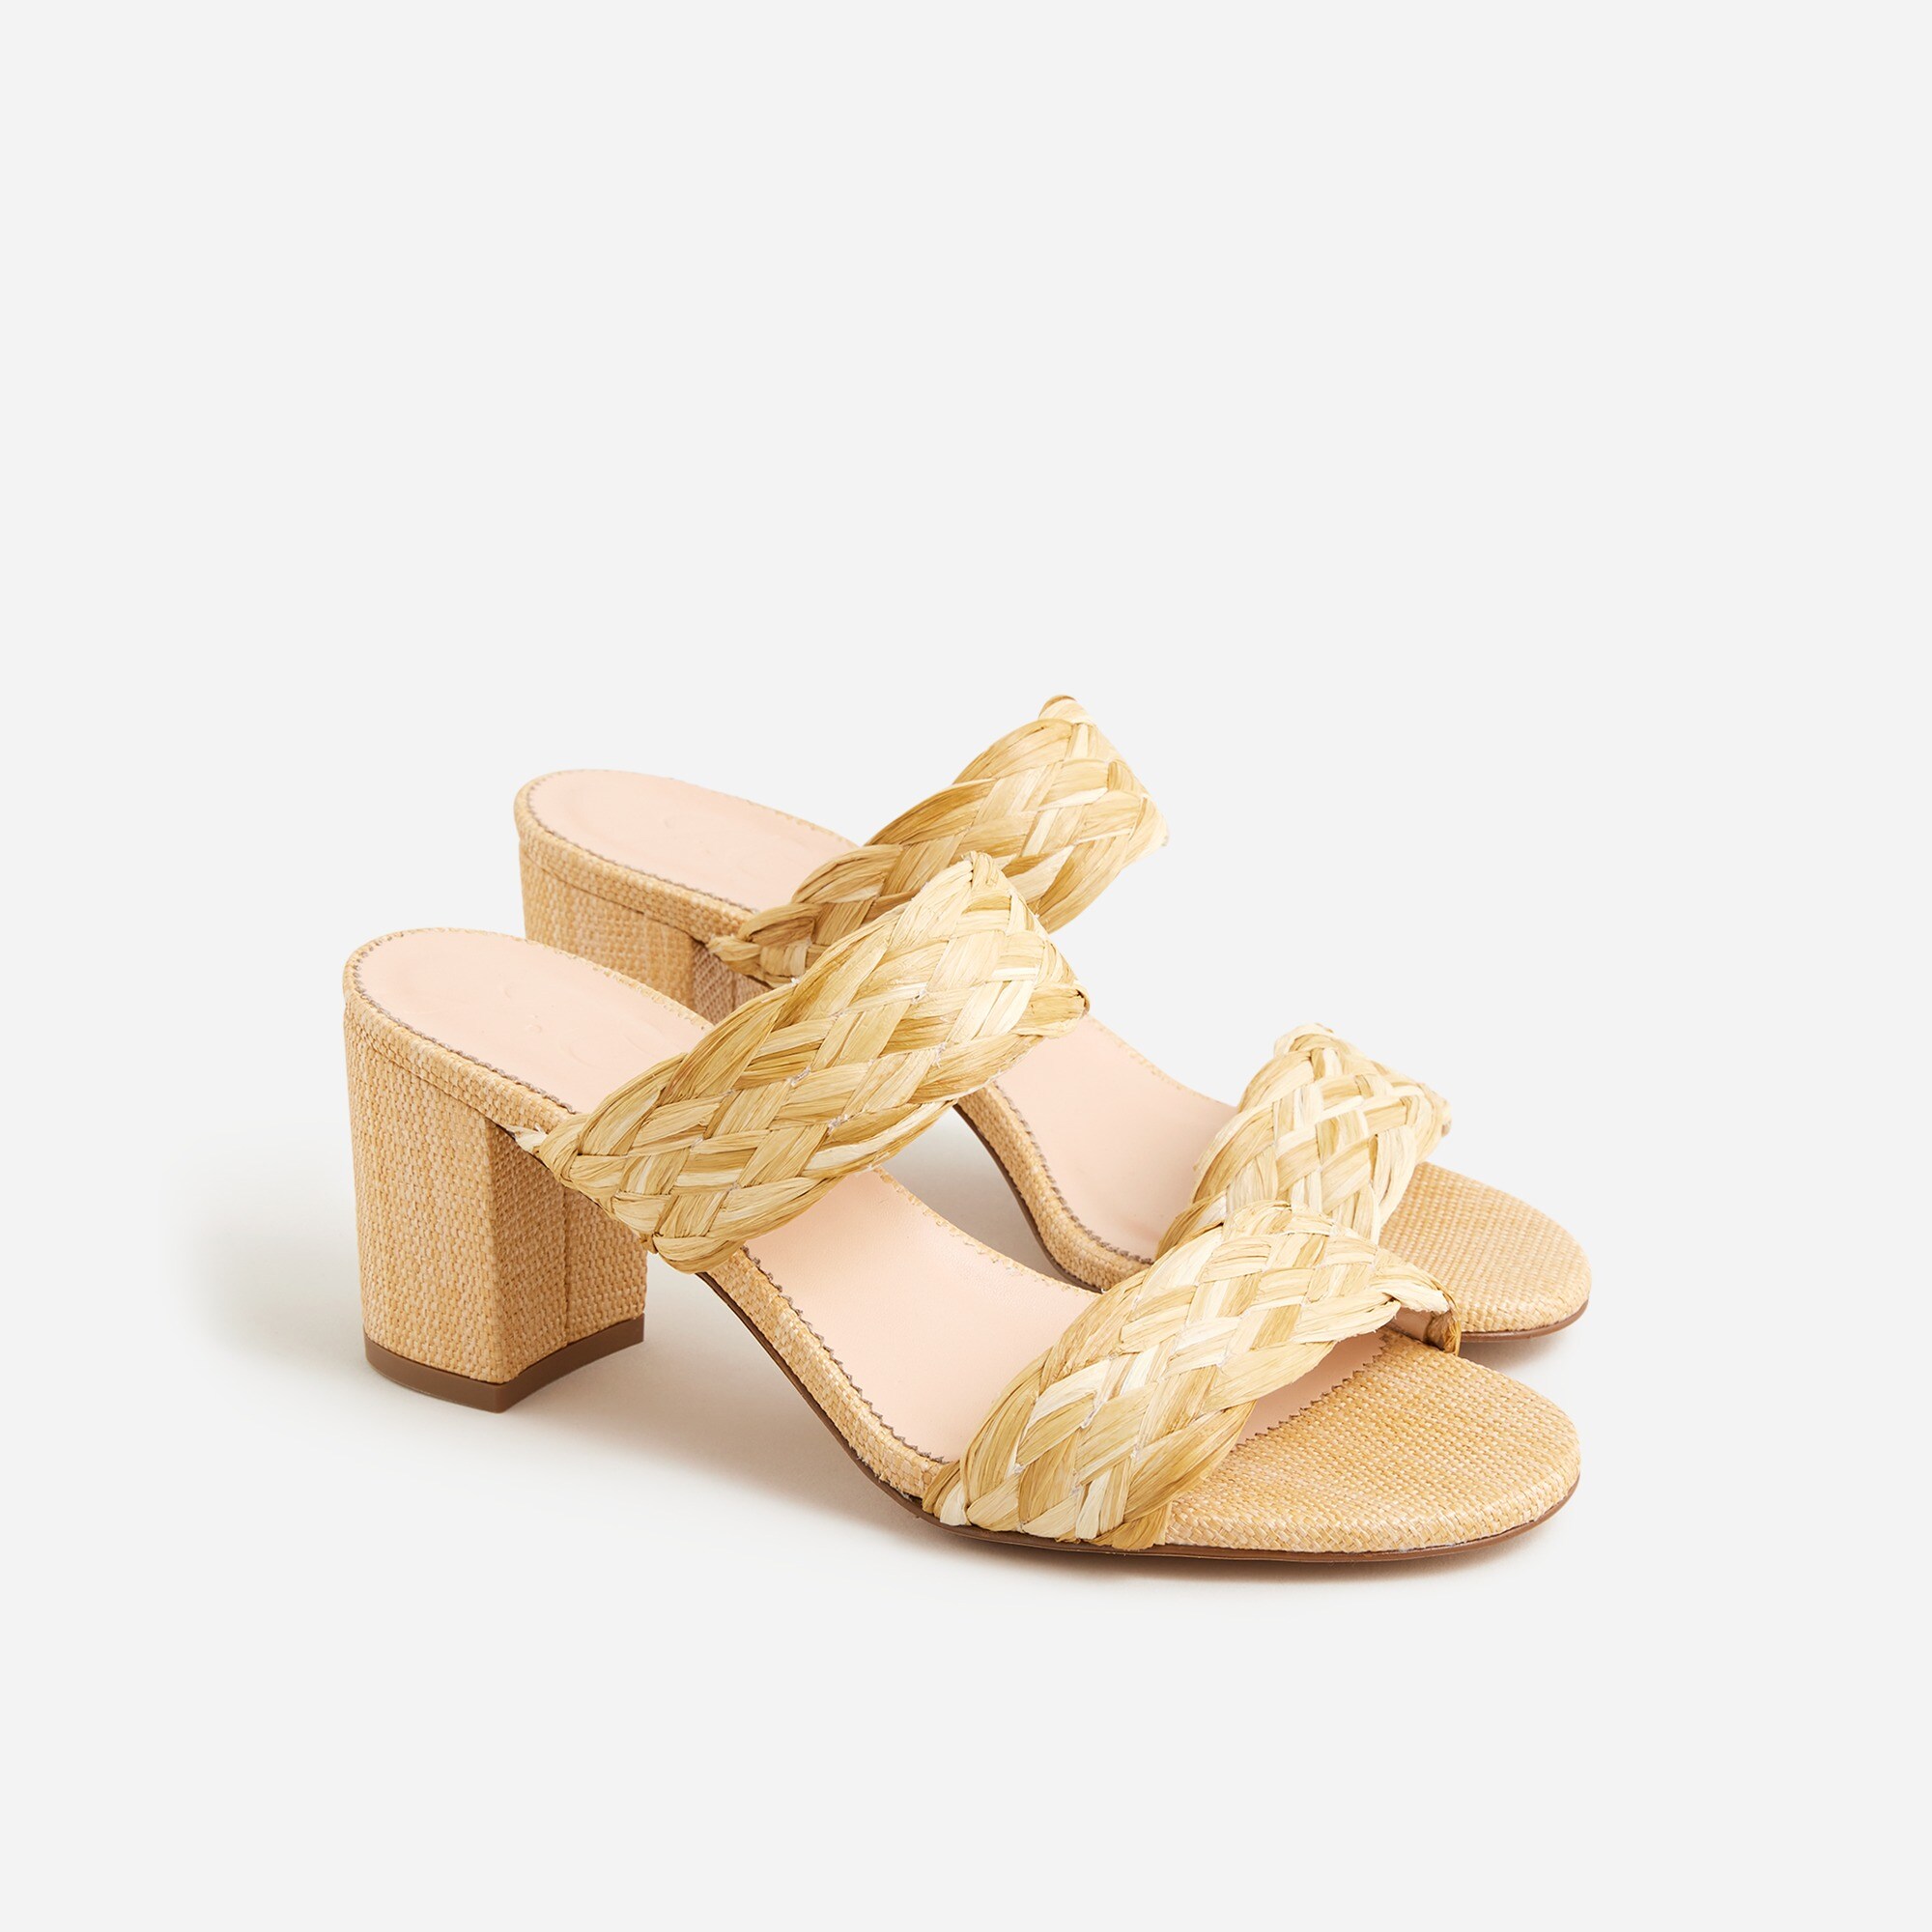  Lucie woven braided-strap sandals